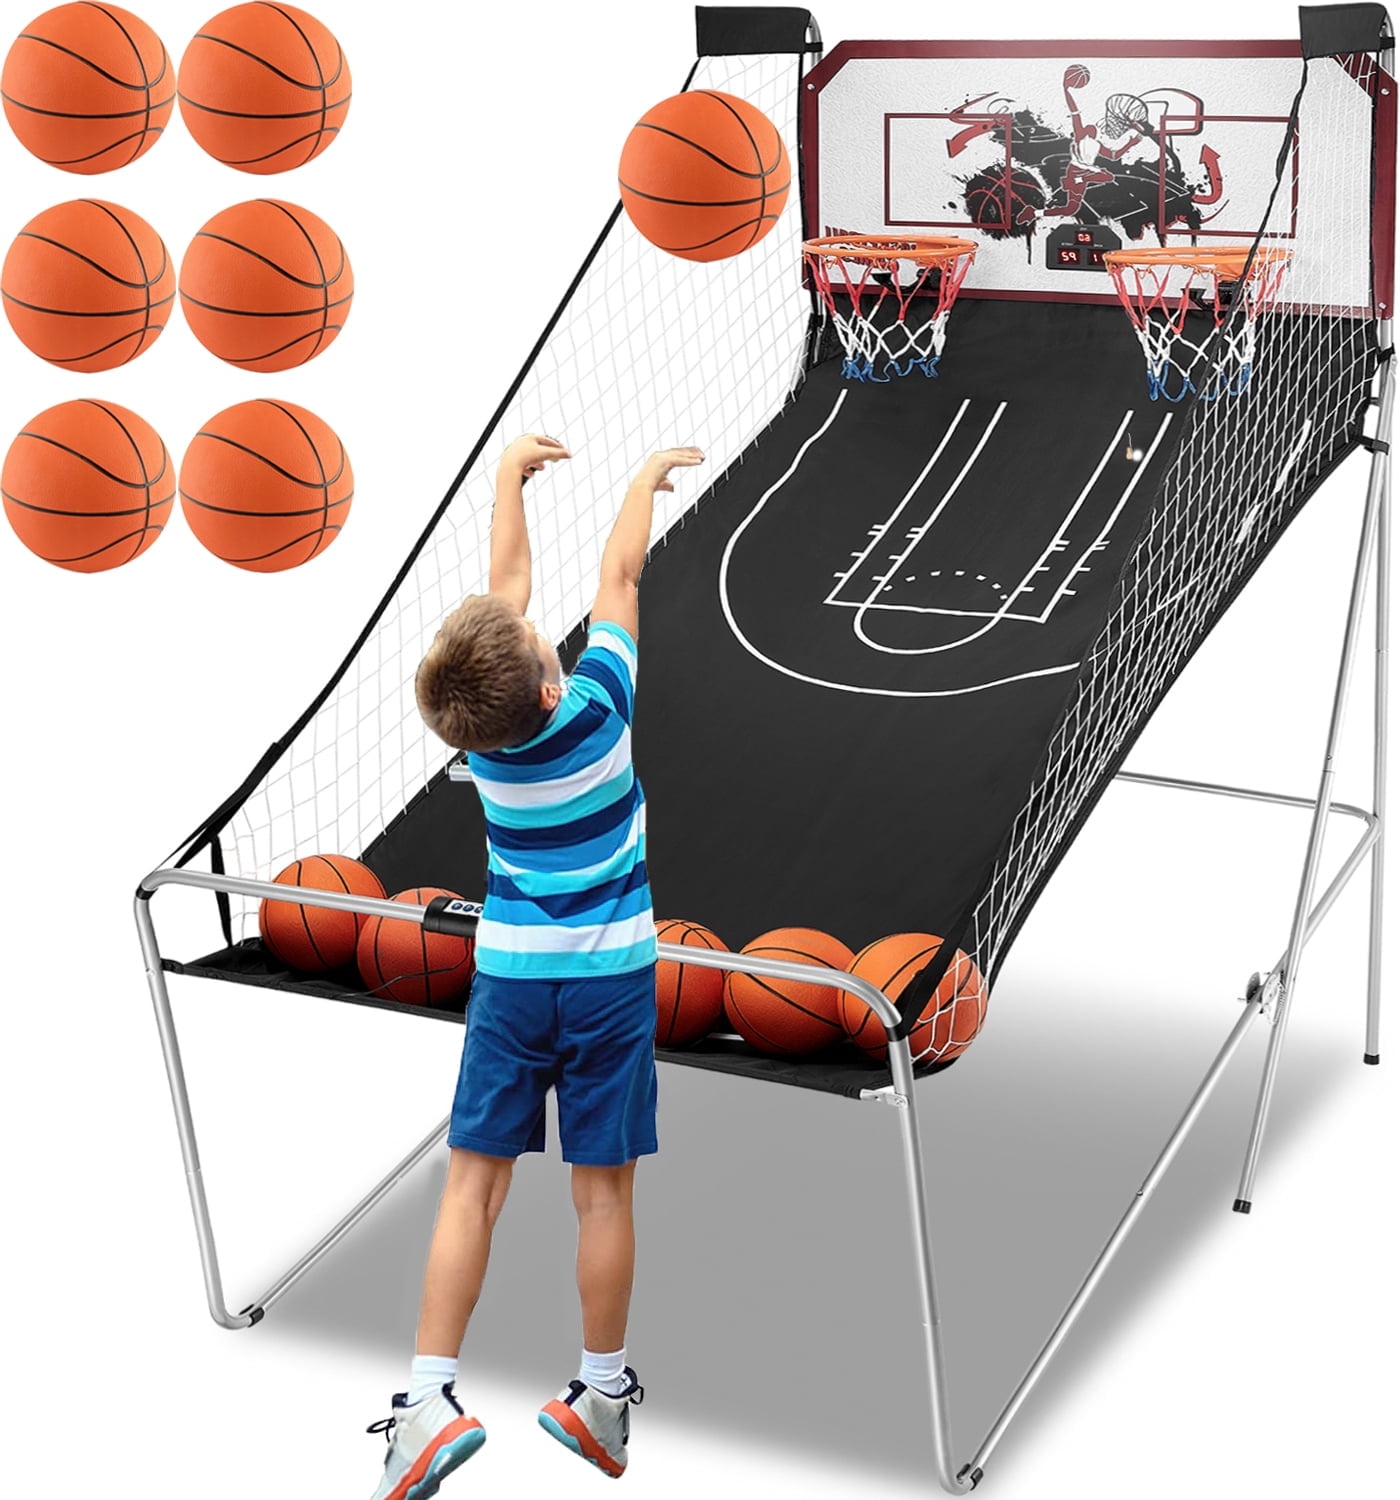 Adults Throwing Ball Coin Operated Street Basketball Games Indoor Sports  Amusement Center Equipment Shooting Hoop Arcade Machine